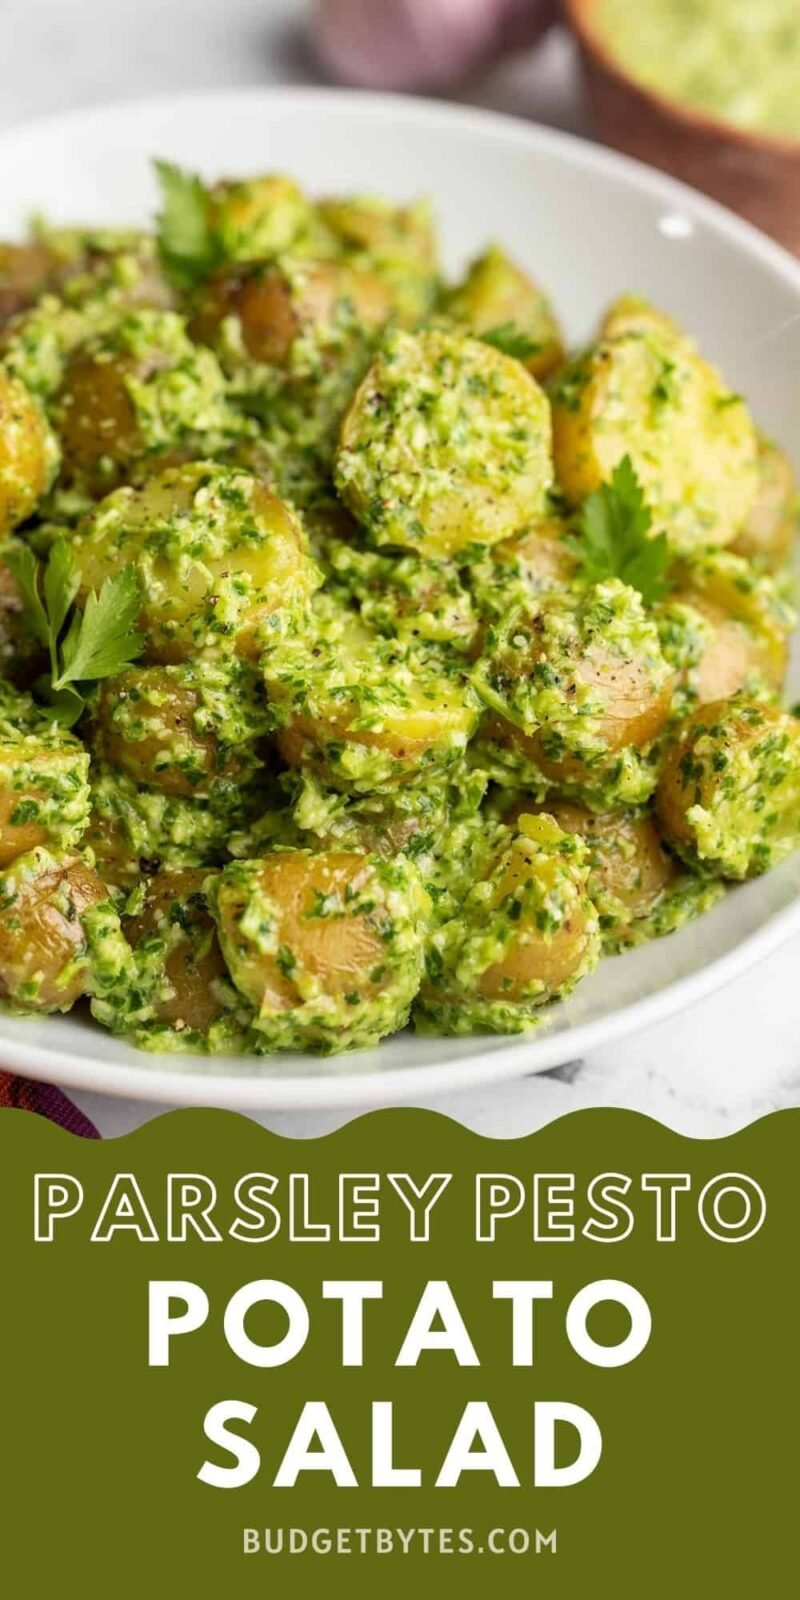 Side view of a bowl of pesto potato salad, title text at the bottom.